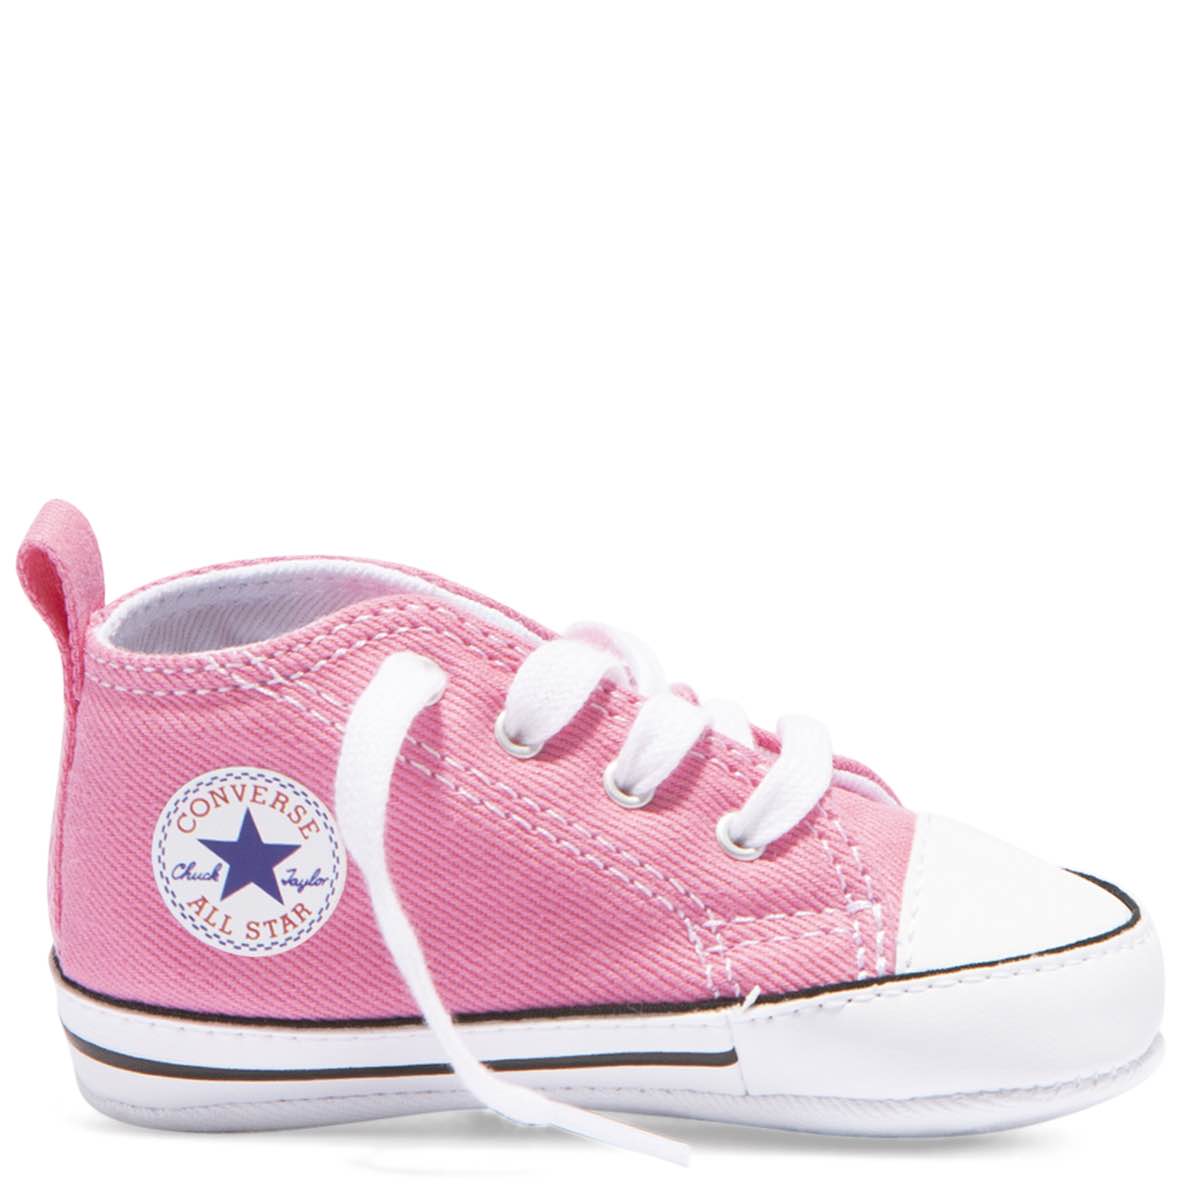 converse baby sneakers